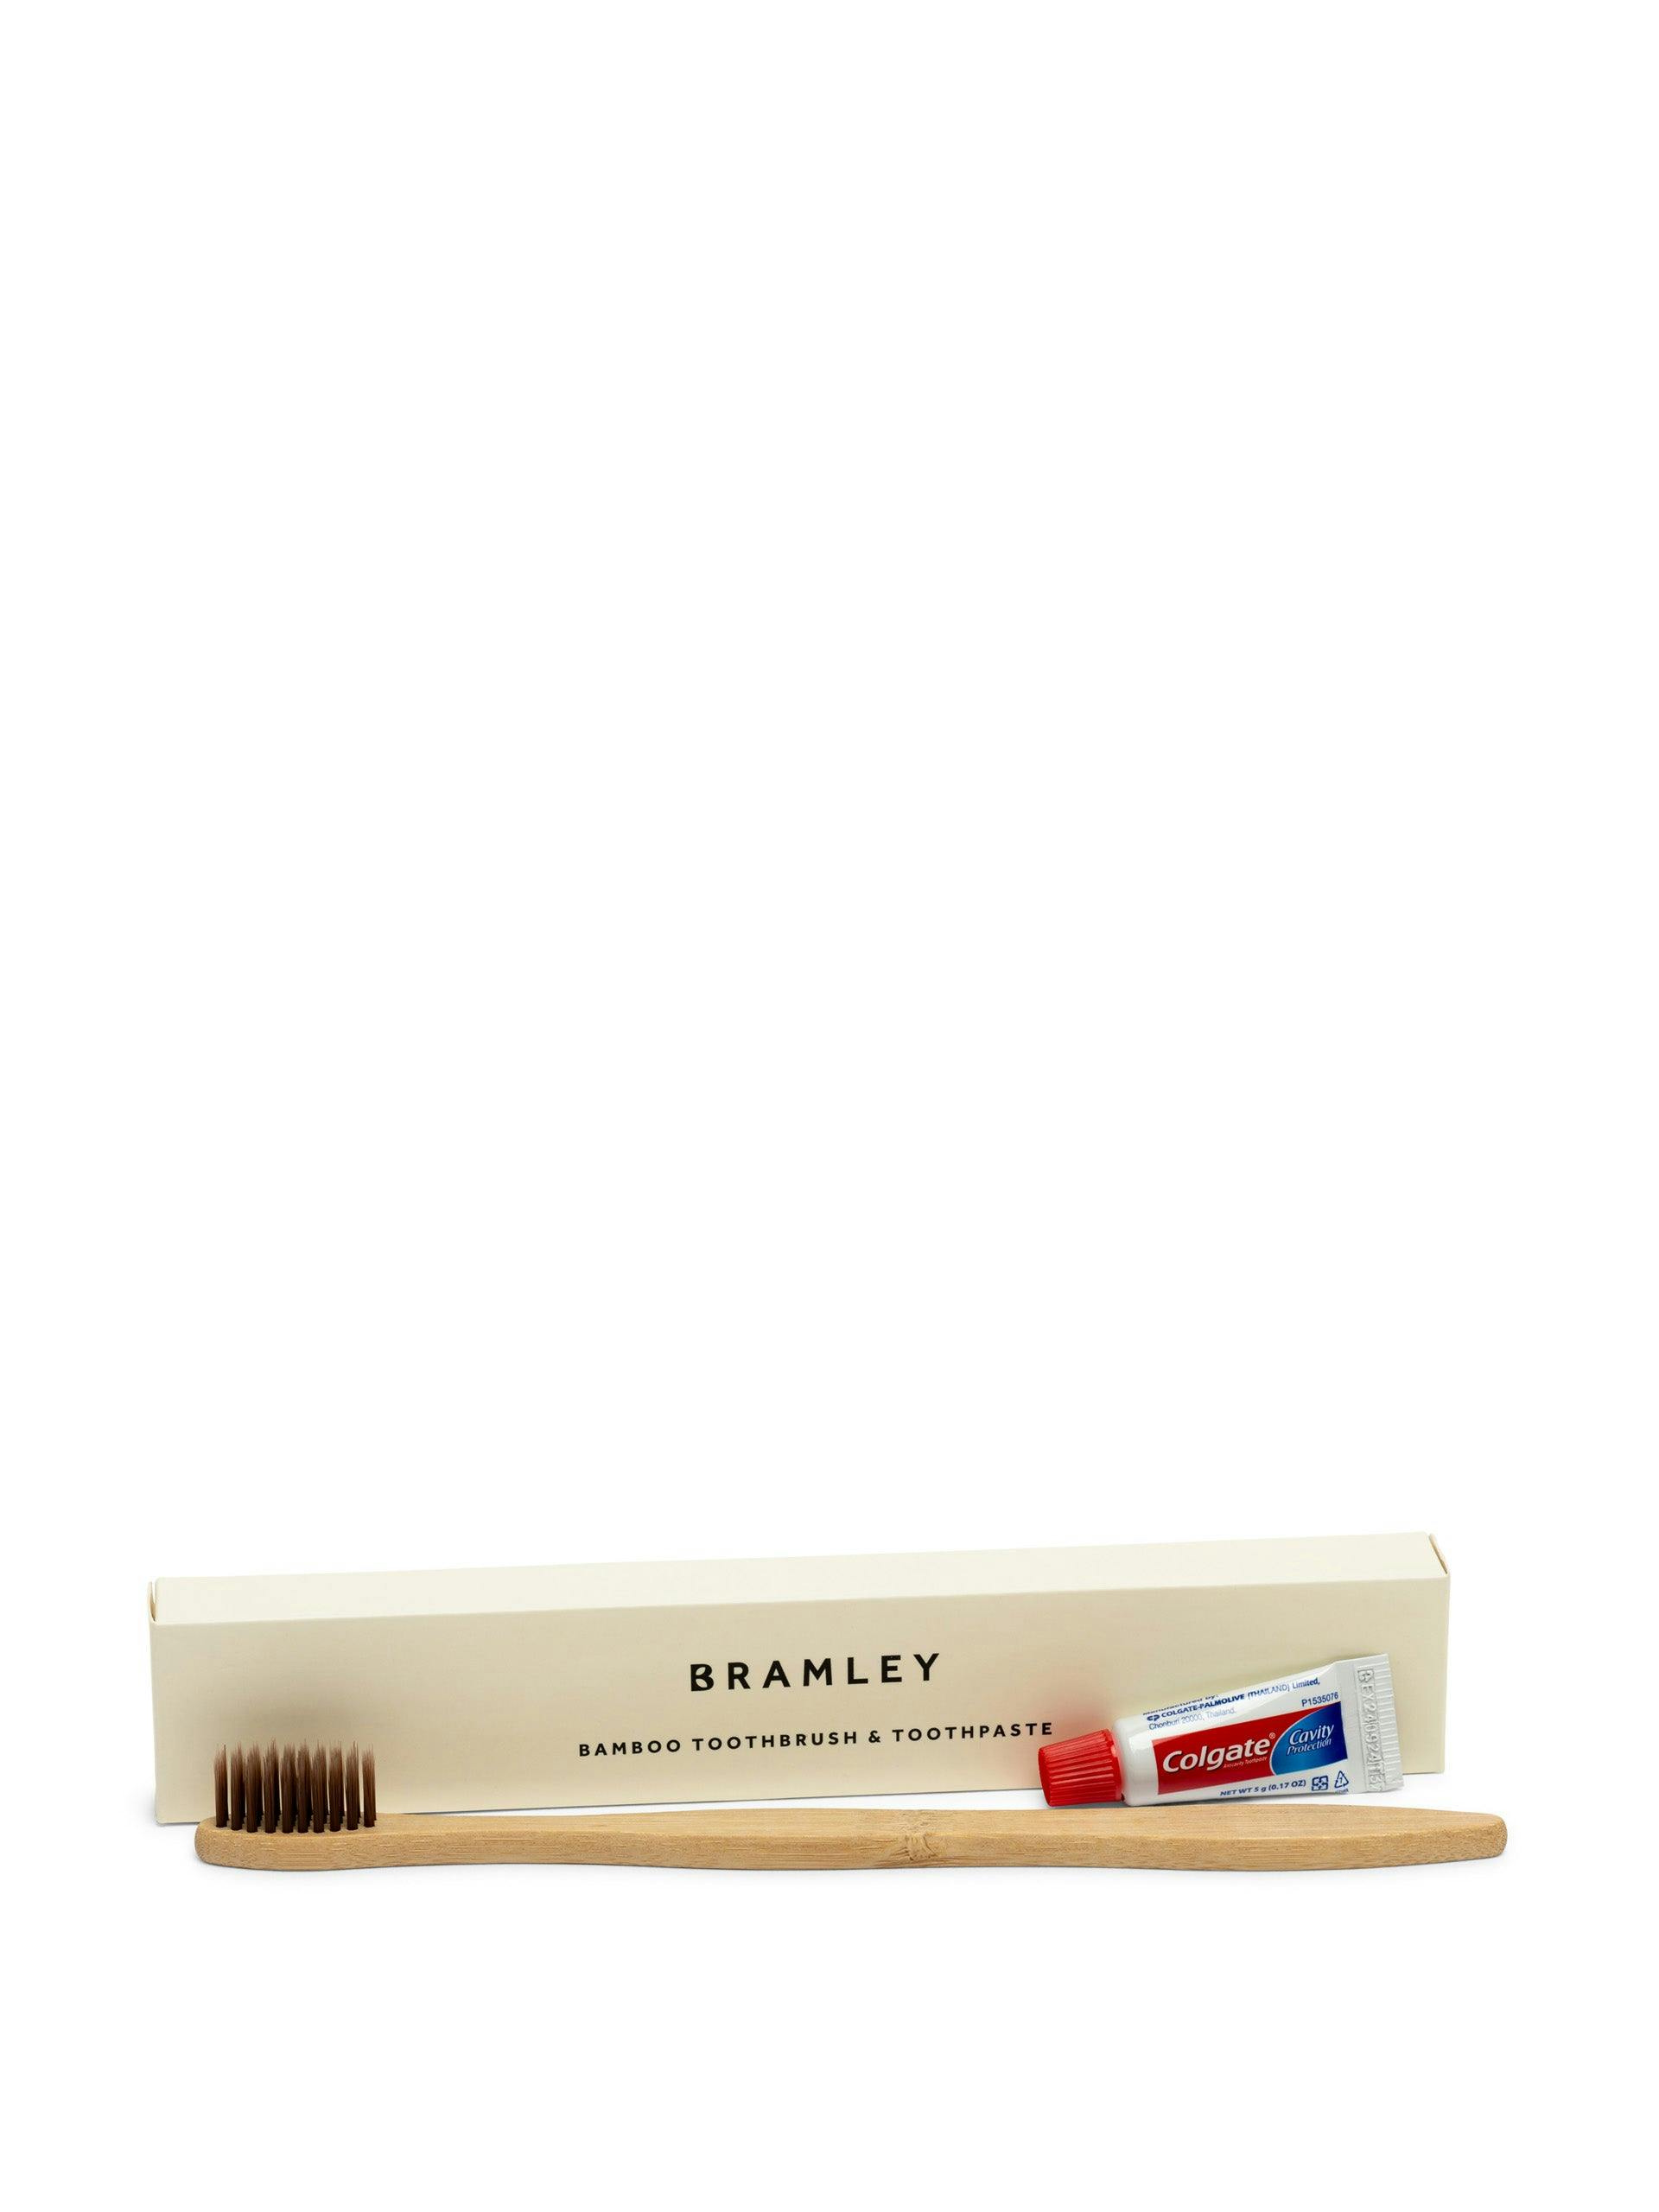 Bamboo toothbrush & toothpaste